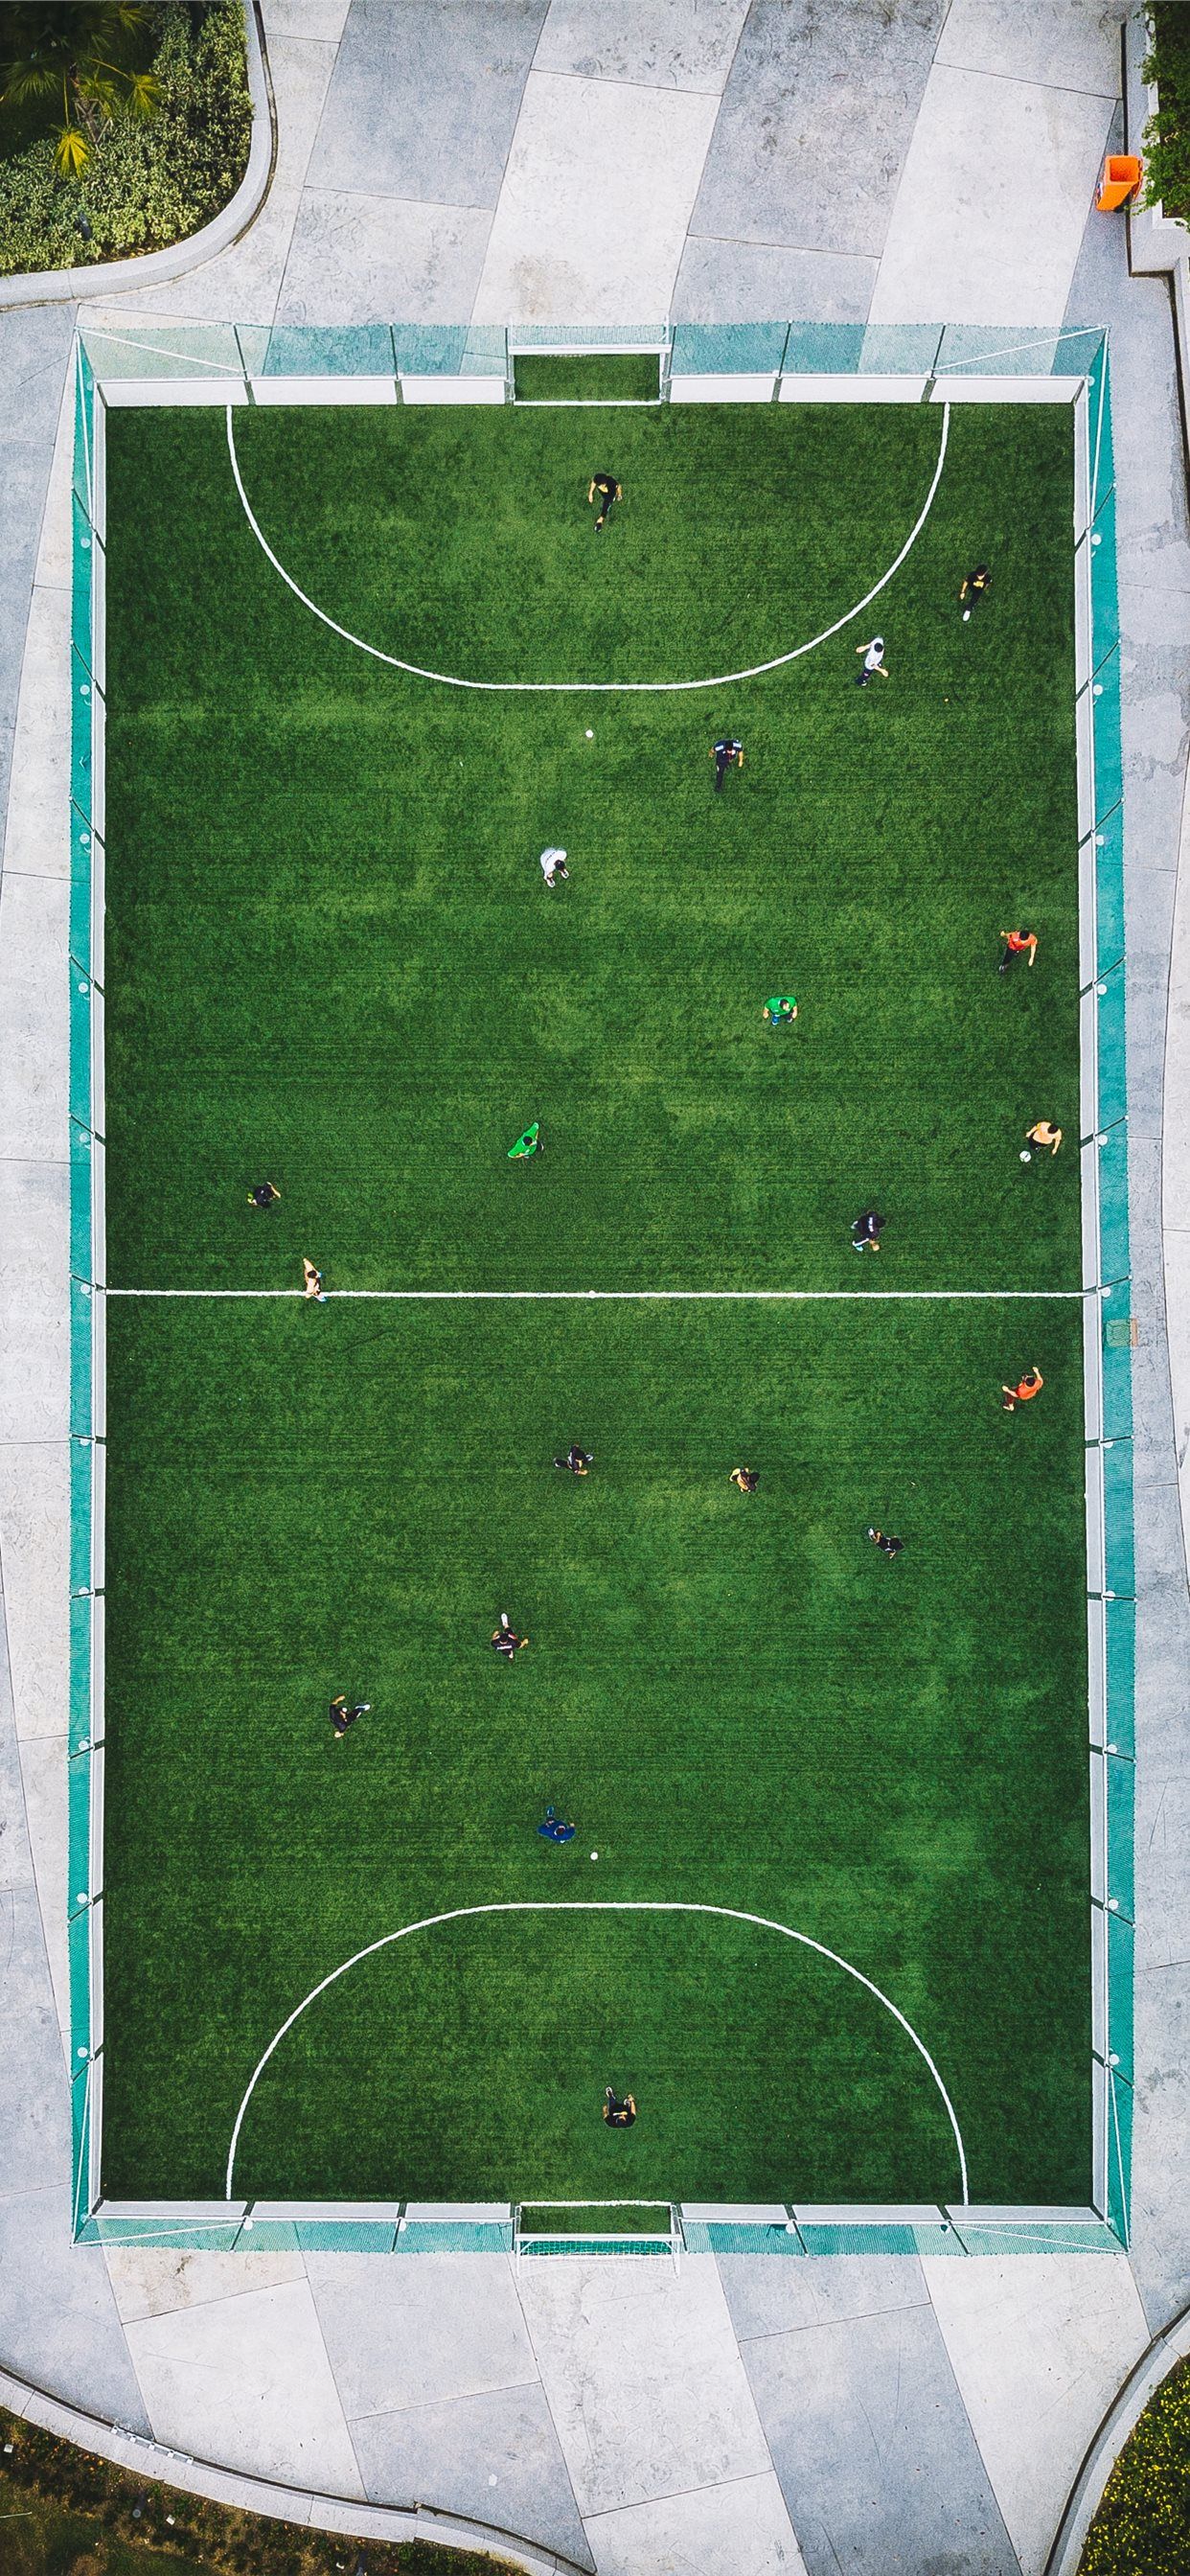 aerial photography of people playing soccer iPhone X Wallpaper Free Download